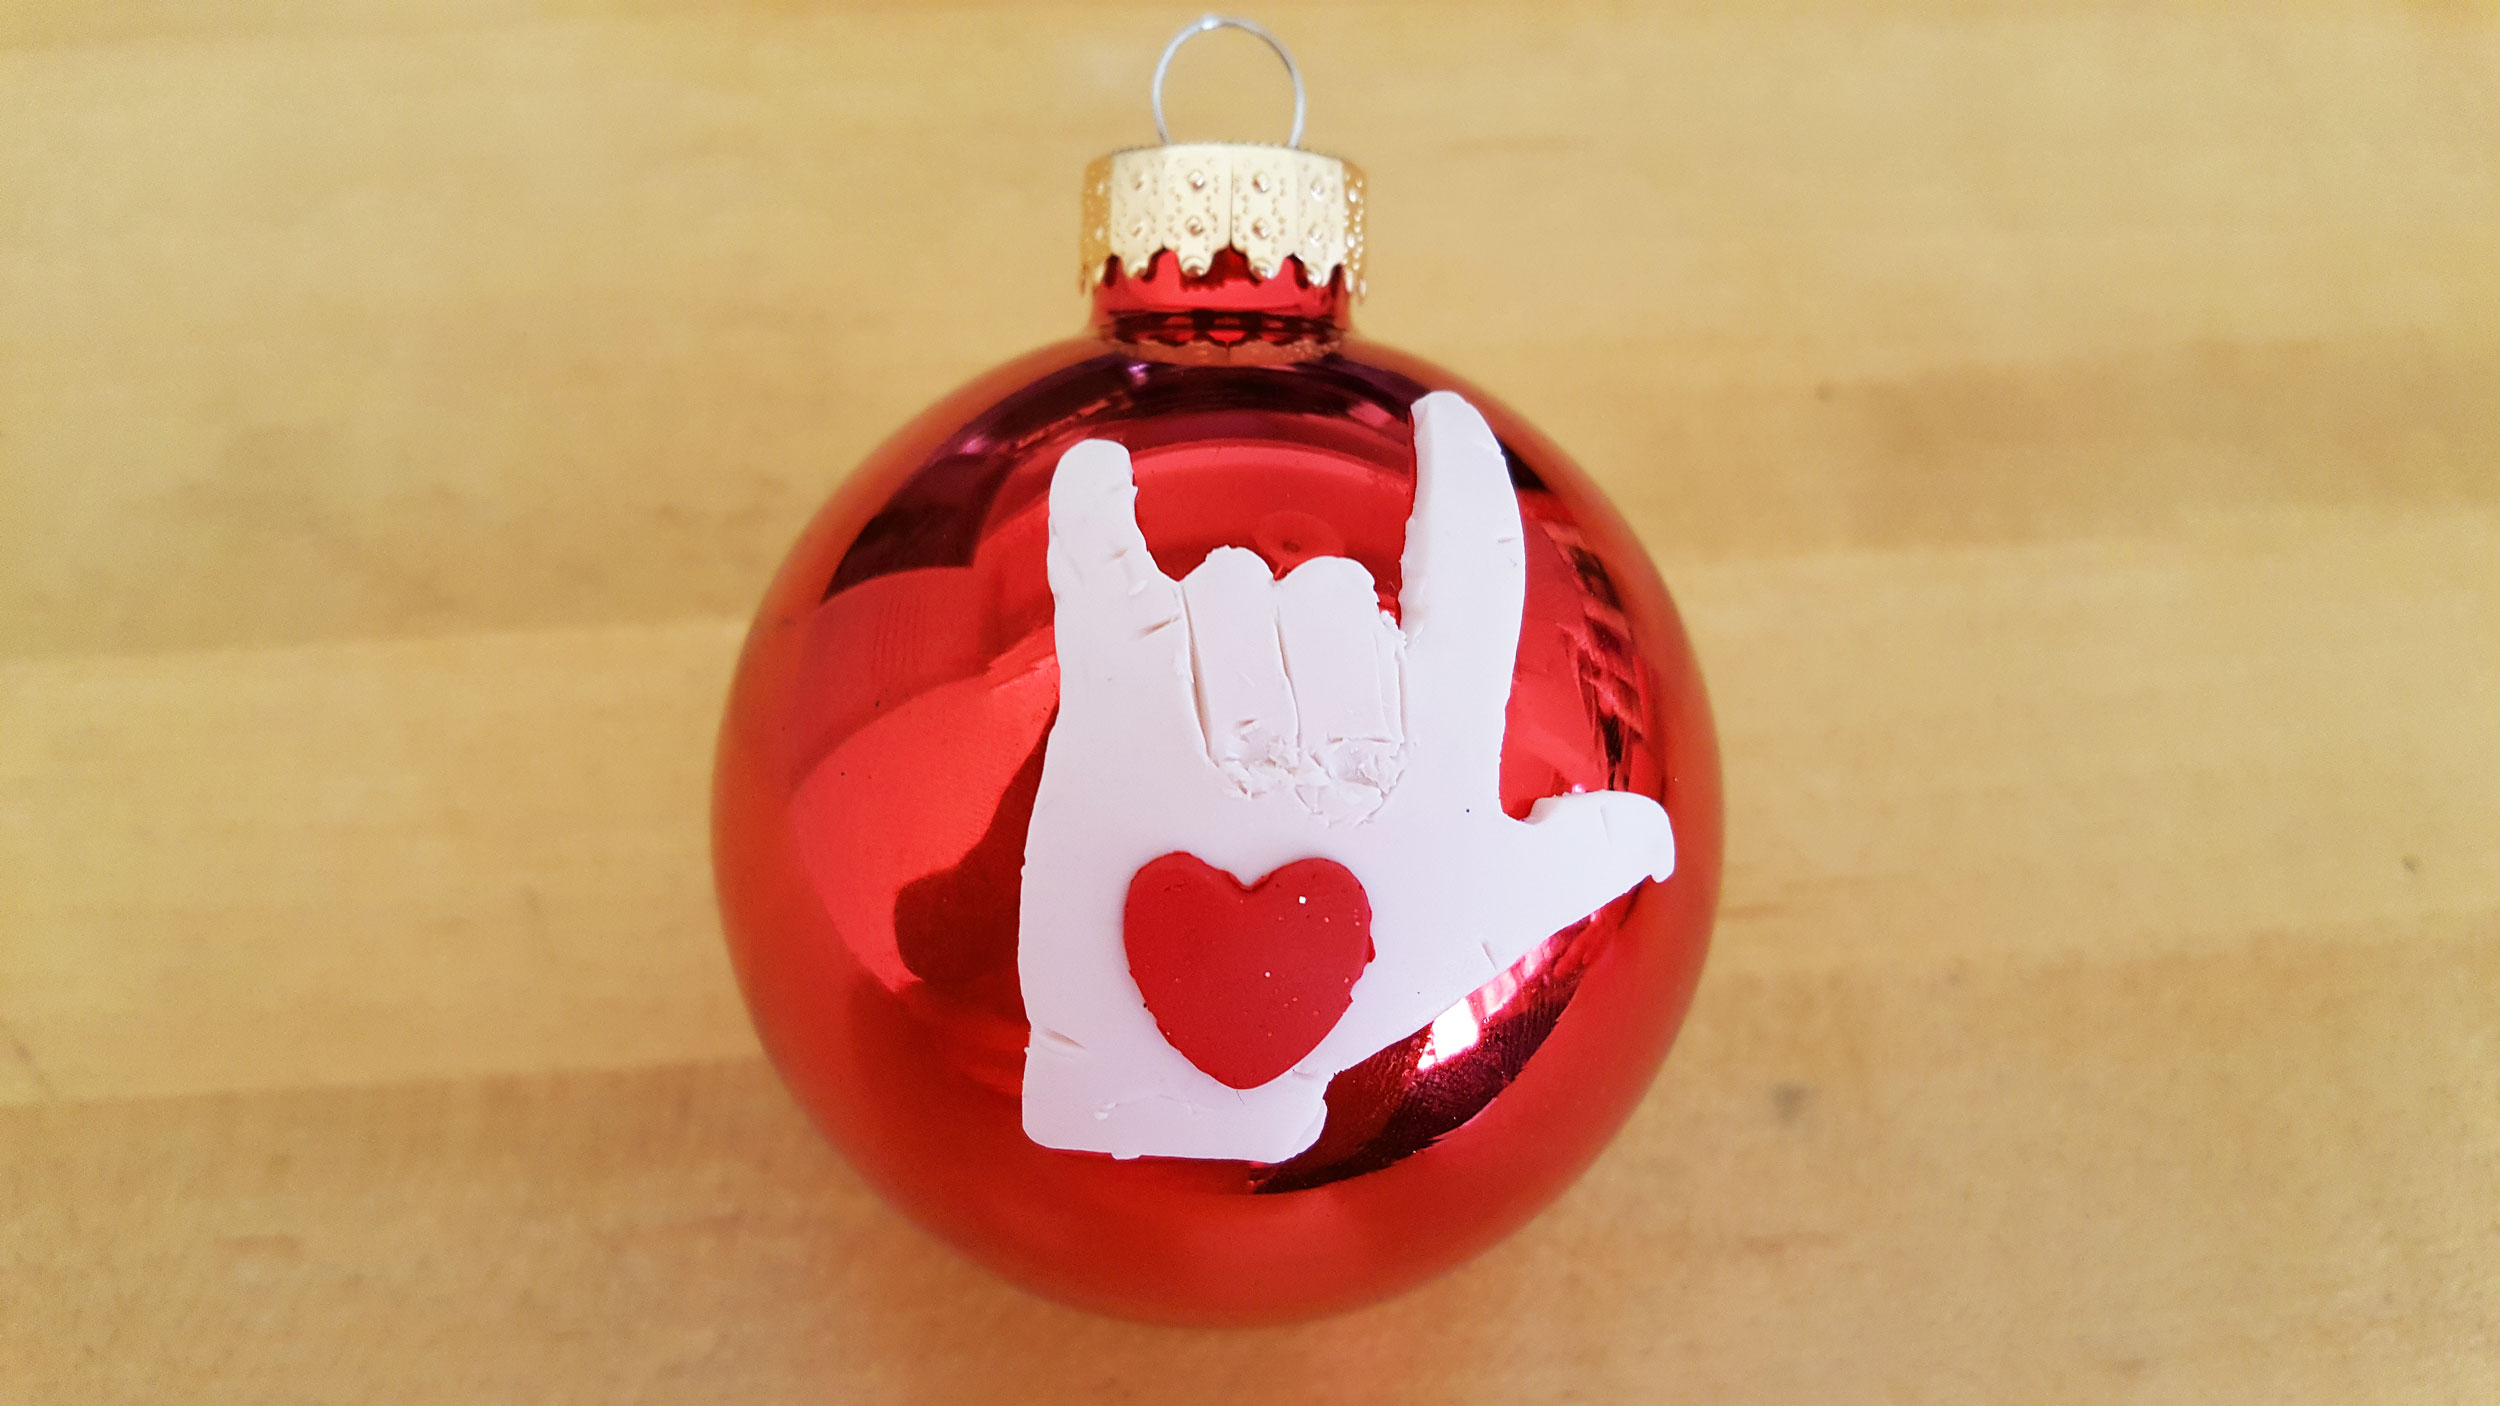 "Rock out" hand with red heart on red glass ball ornament | OrnamentShop.com